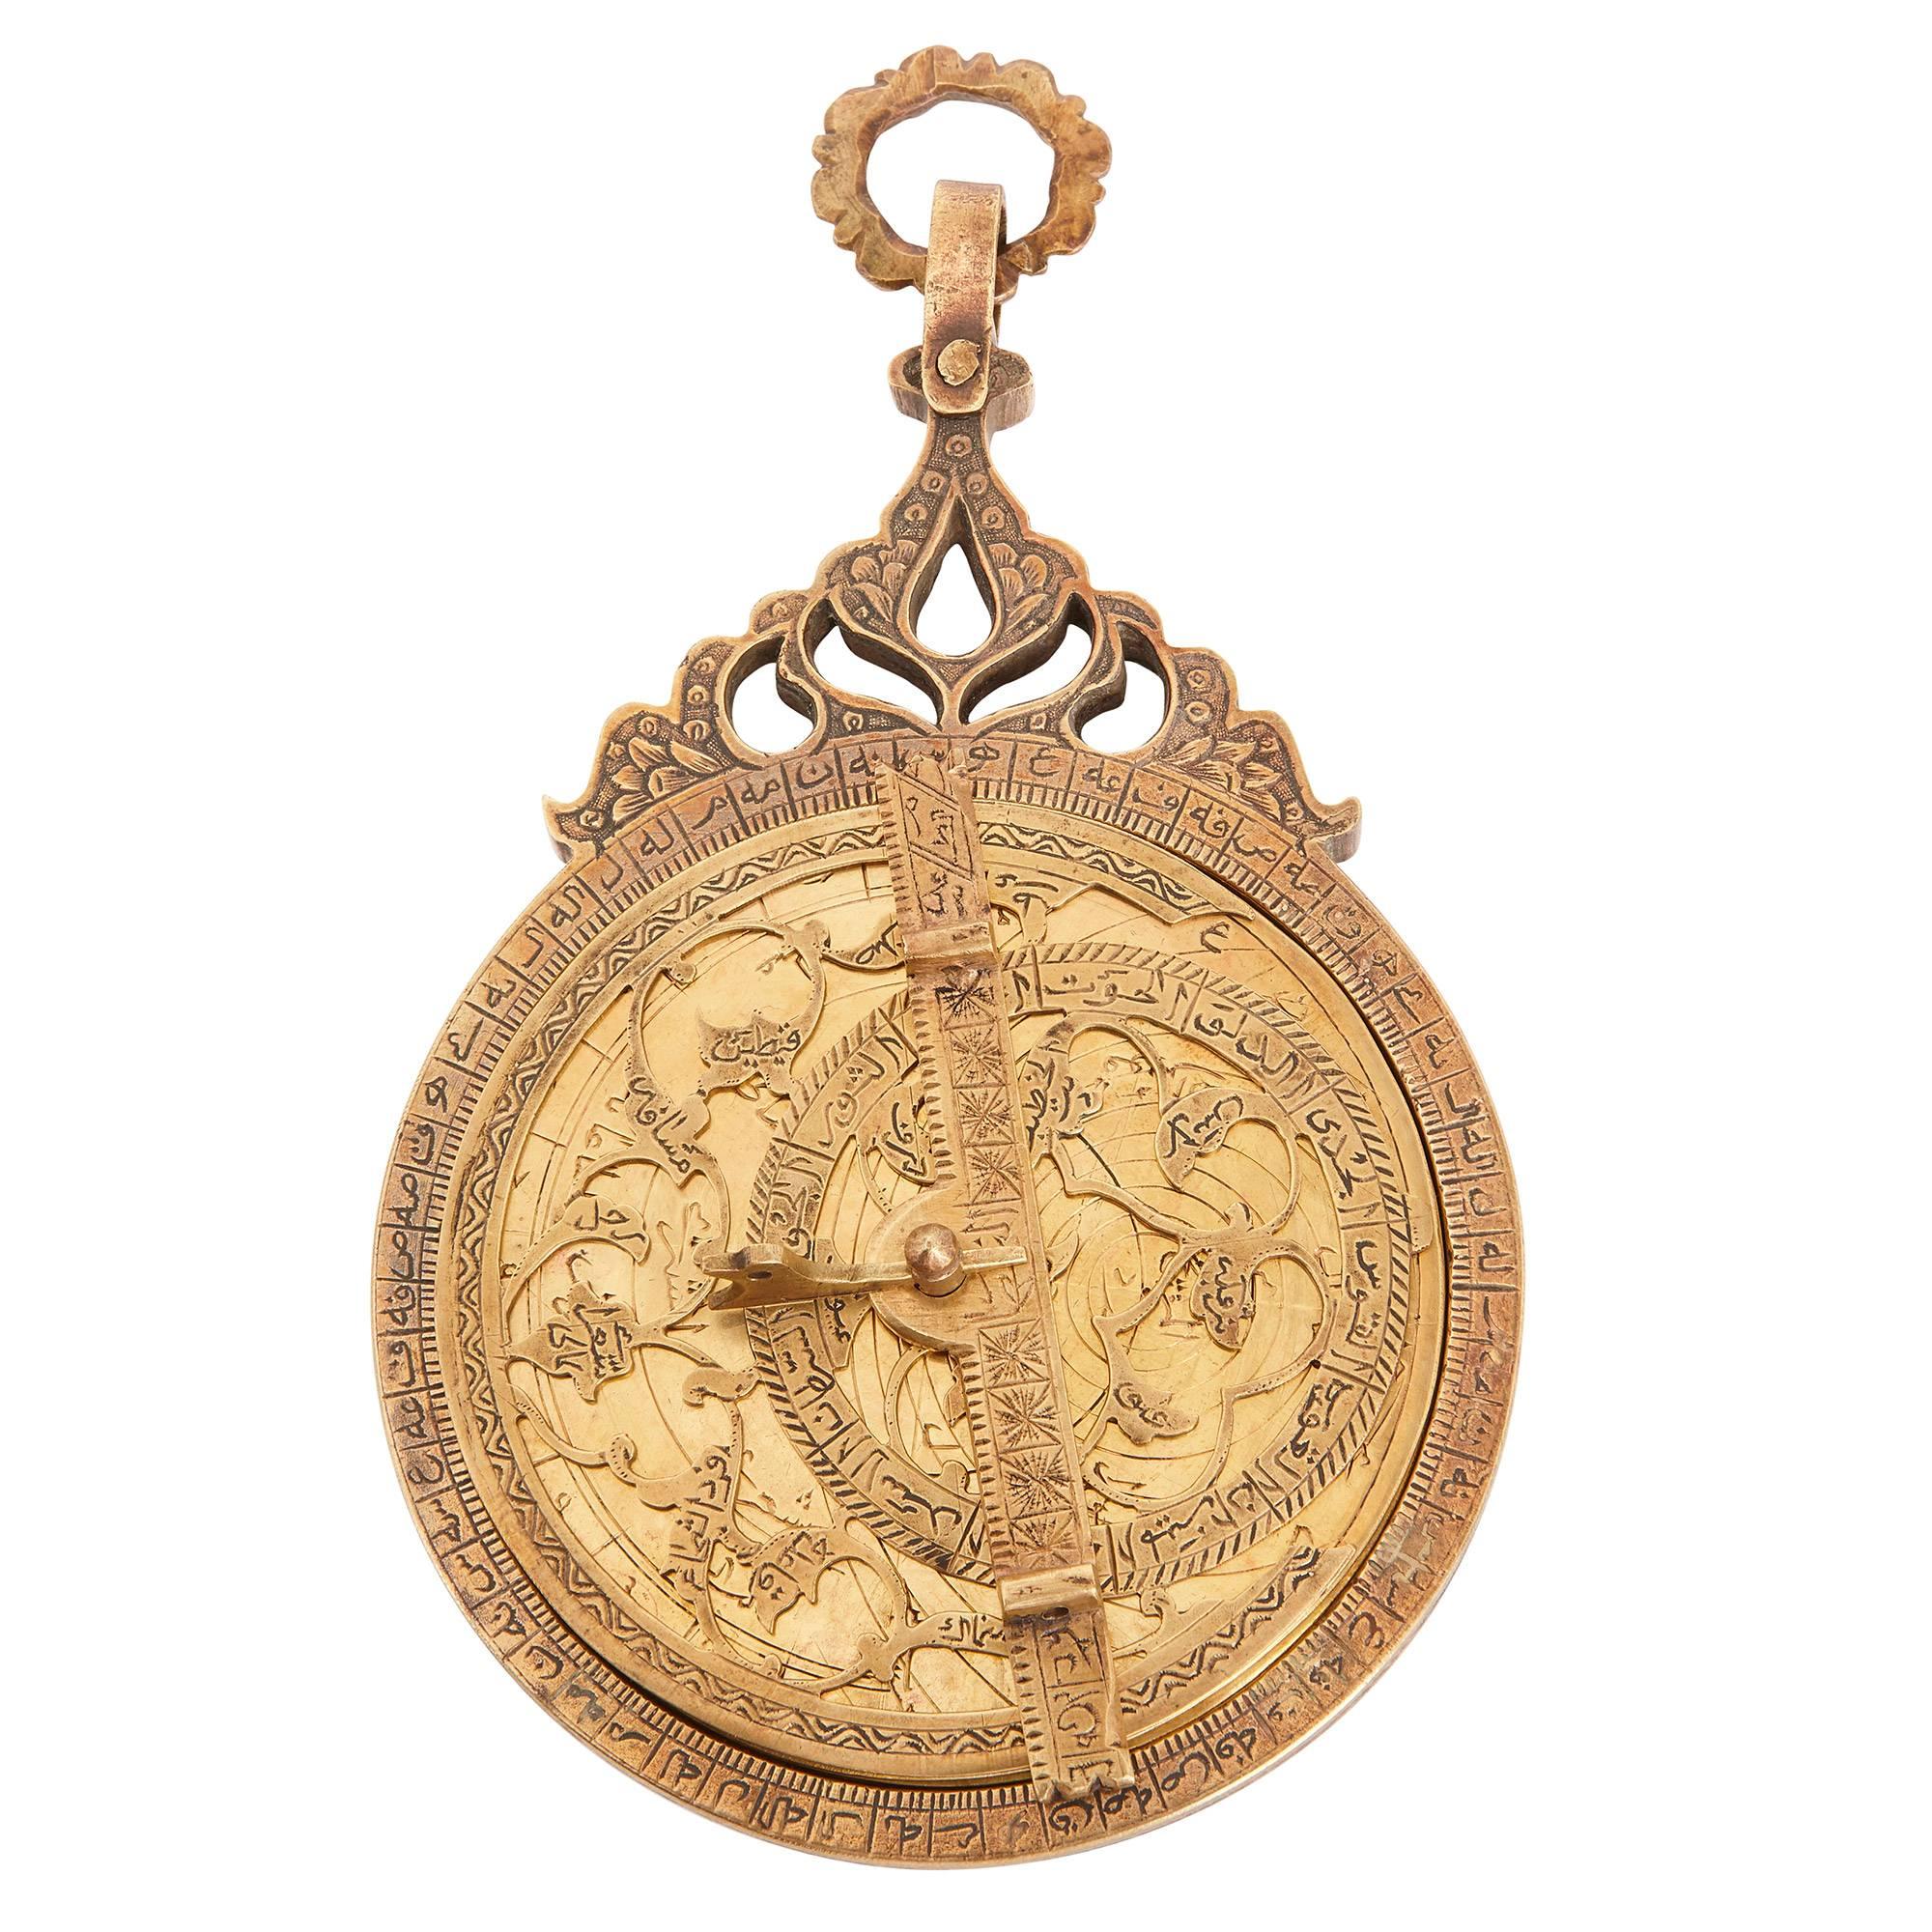 Antique Engraved Brass Astrolabe from the Persian Qajar Period